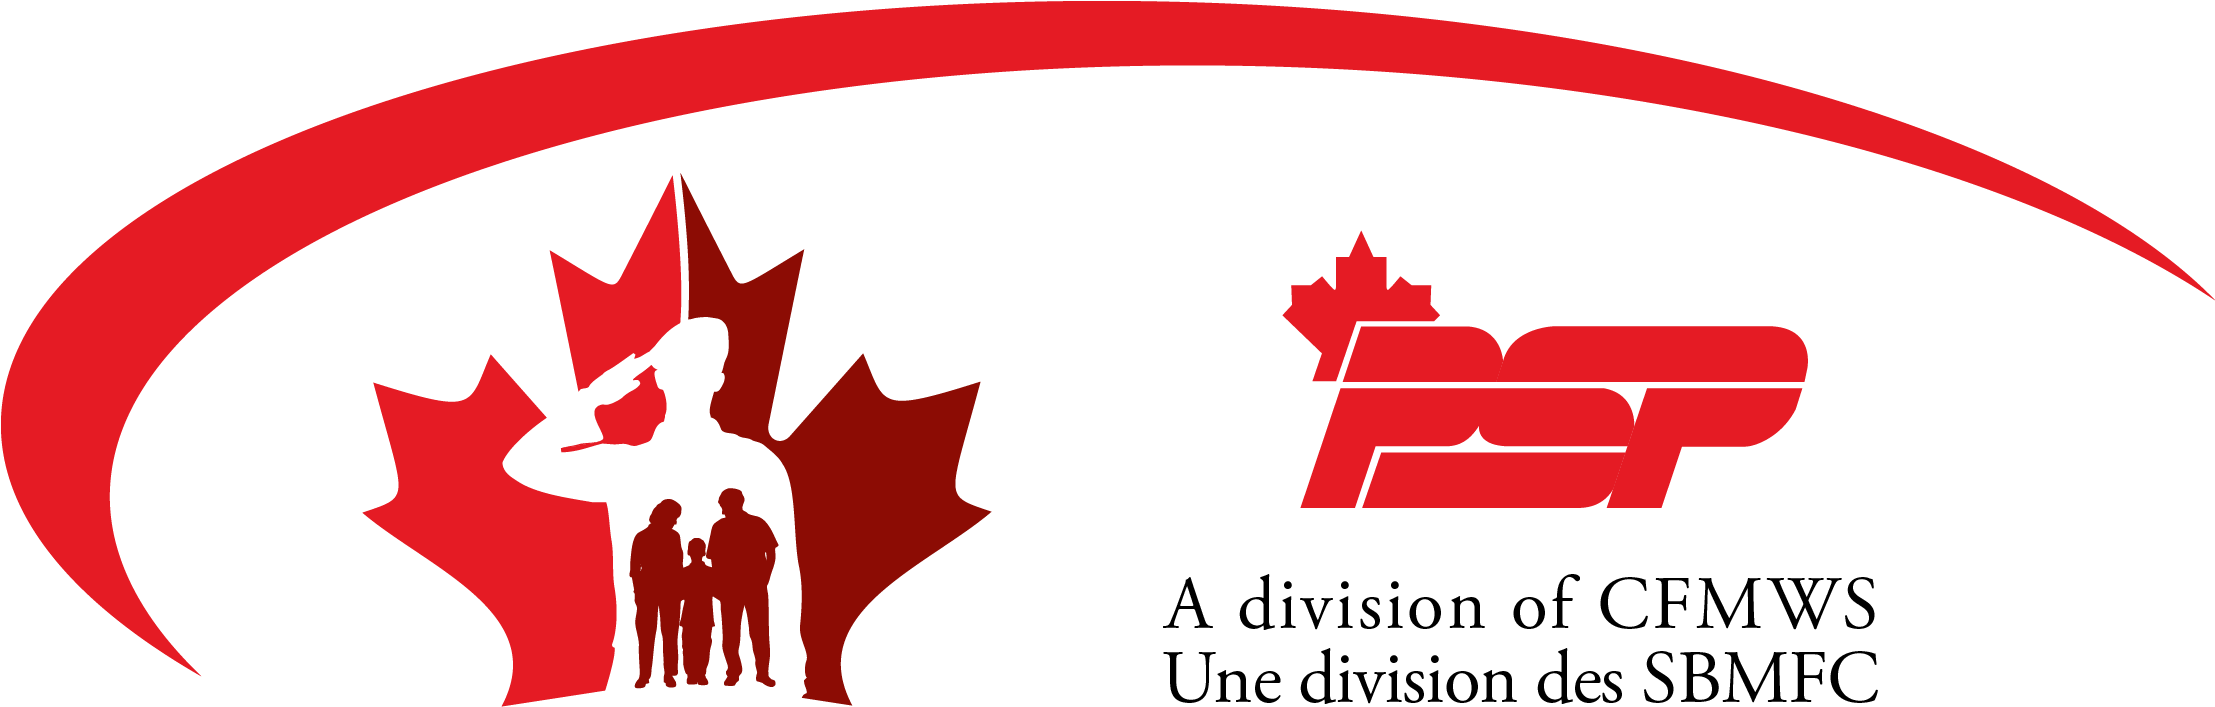 Psp Logo - Support Our Troops Canada (2214x727)